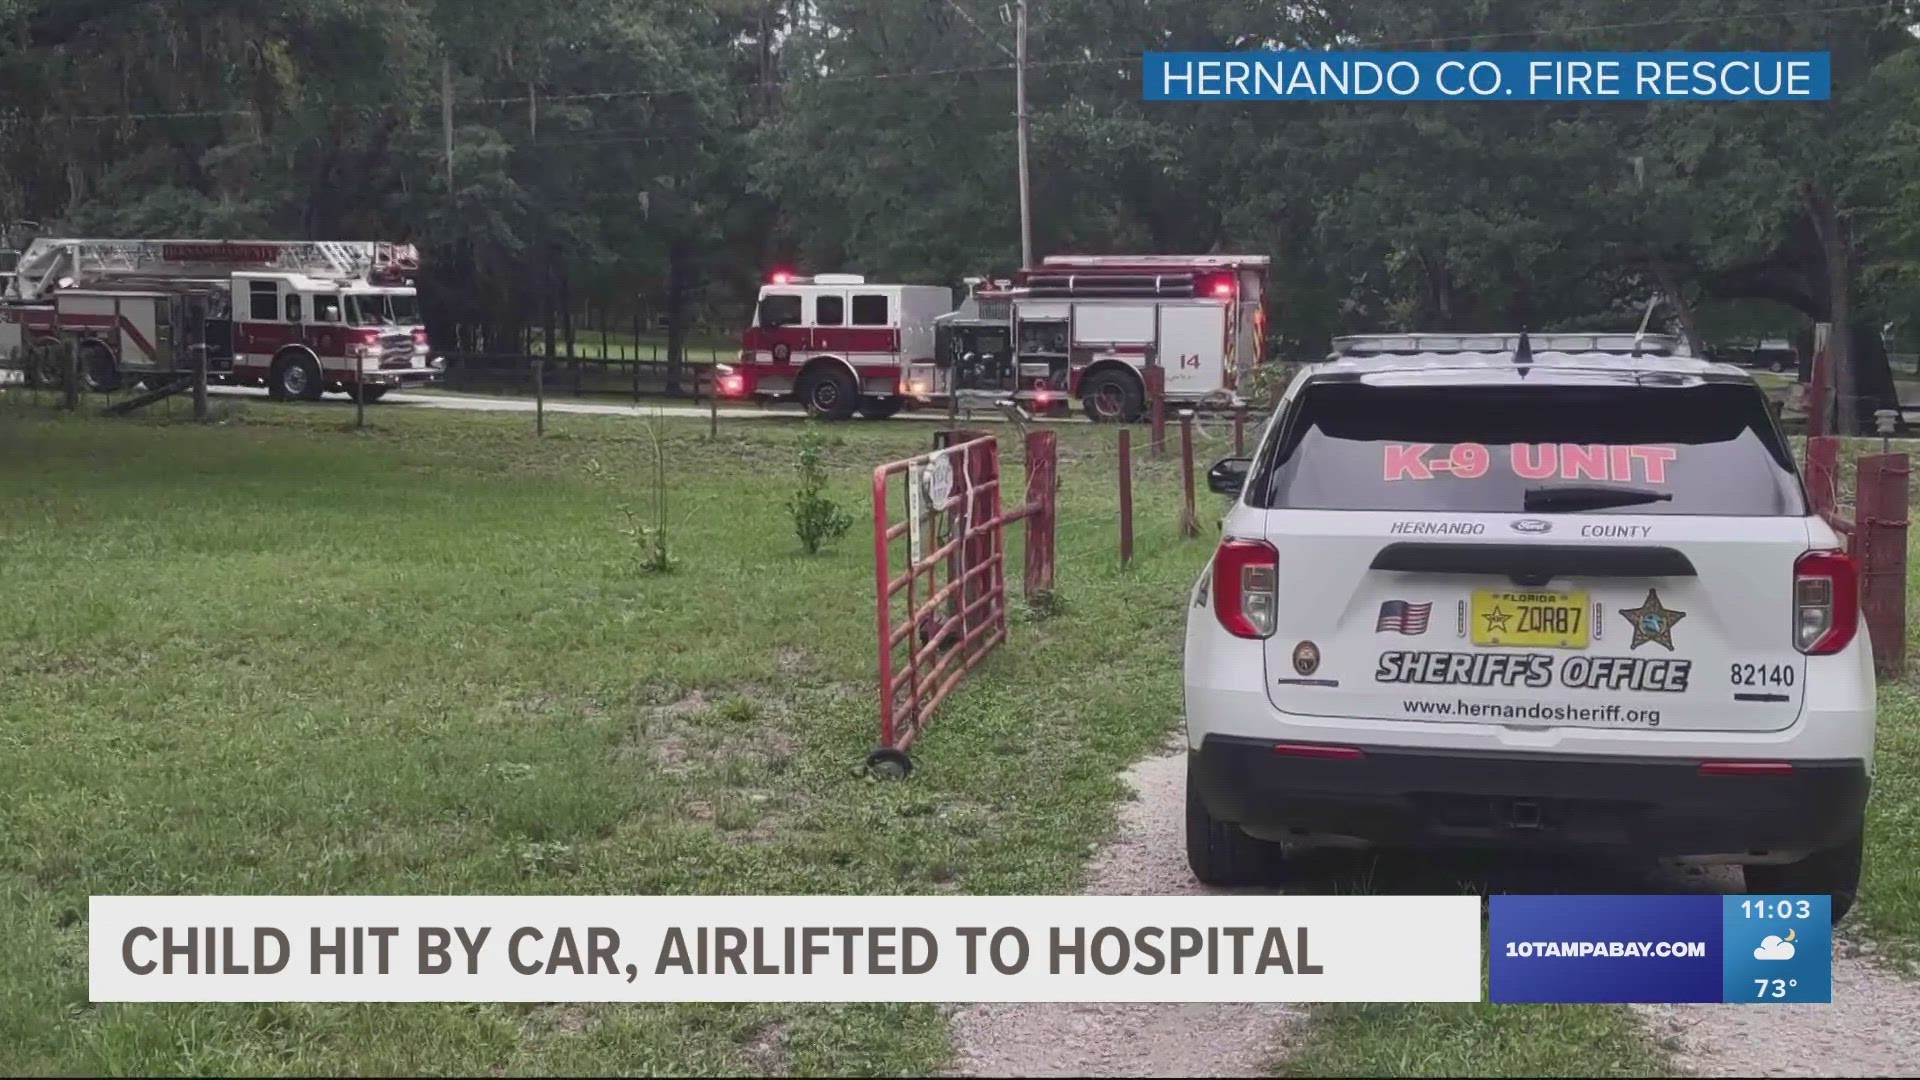 The toddler was taken to a trauma center in Gainesville, the Hernando County Sheriff's Office said.